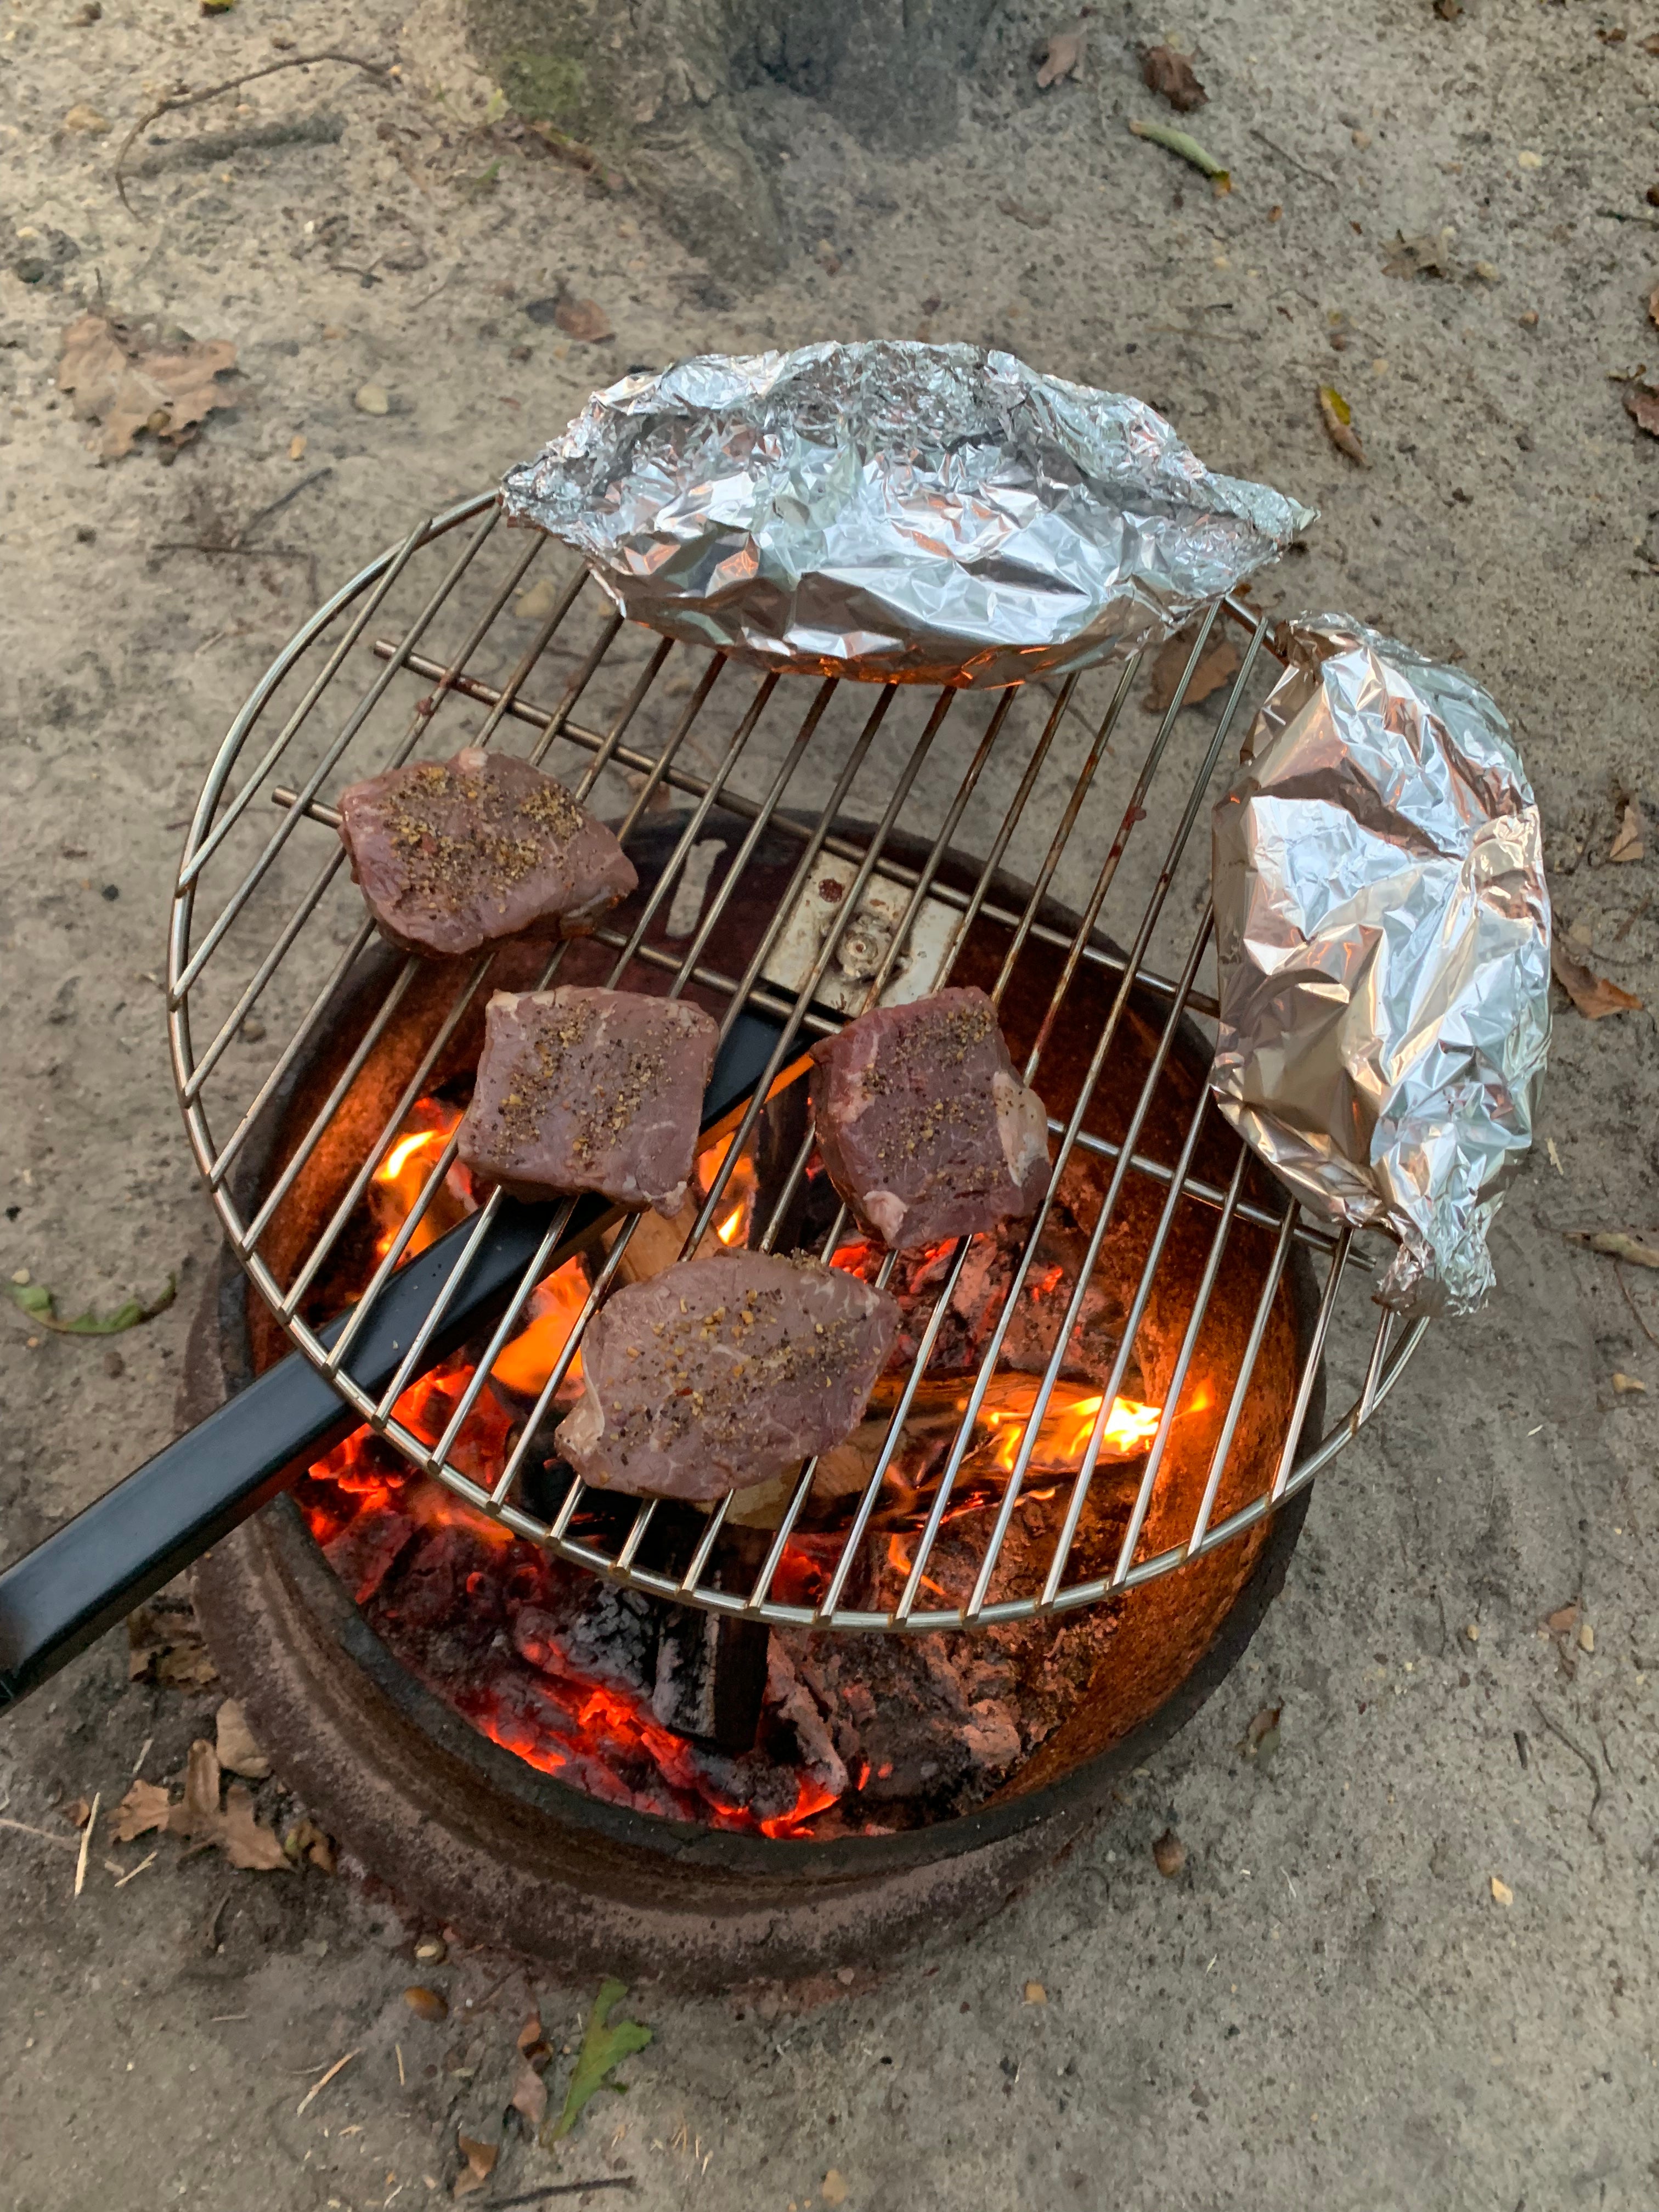 MMMM!!!  Steak over a wood fire!!  Delicious!!